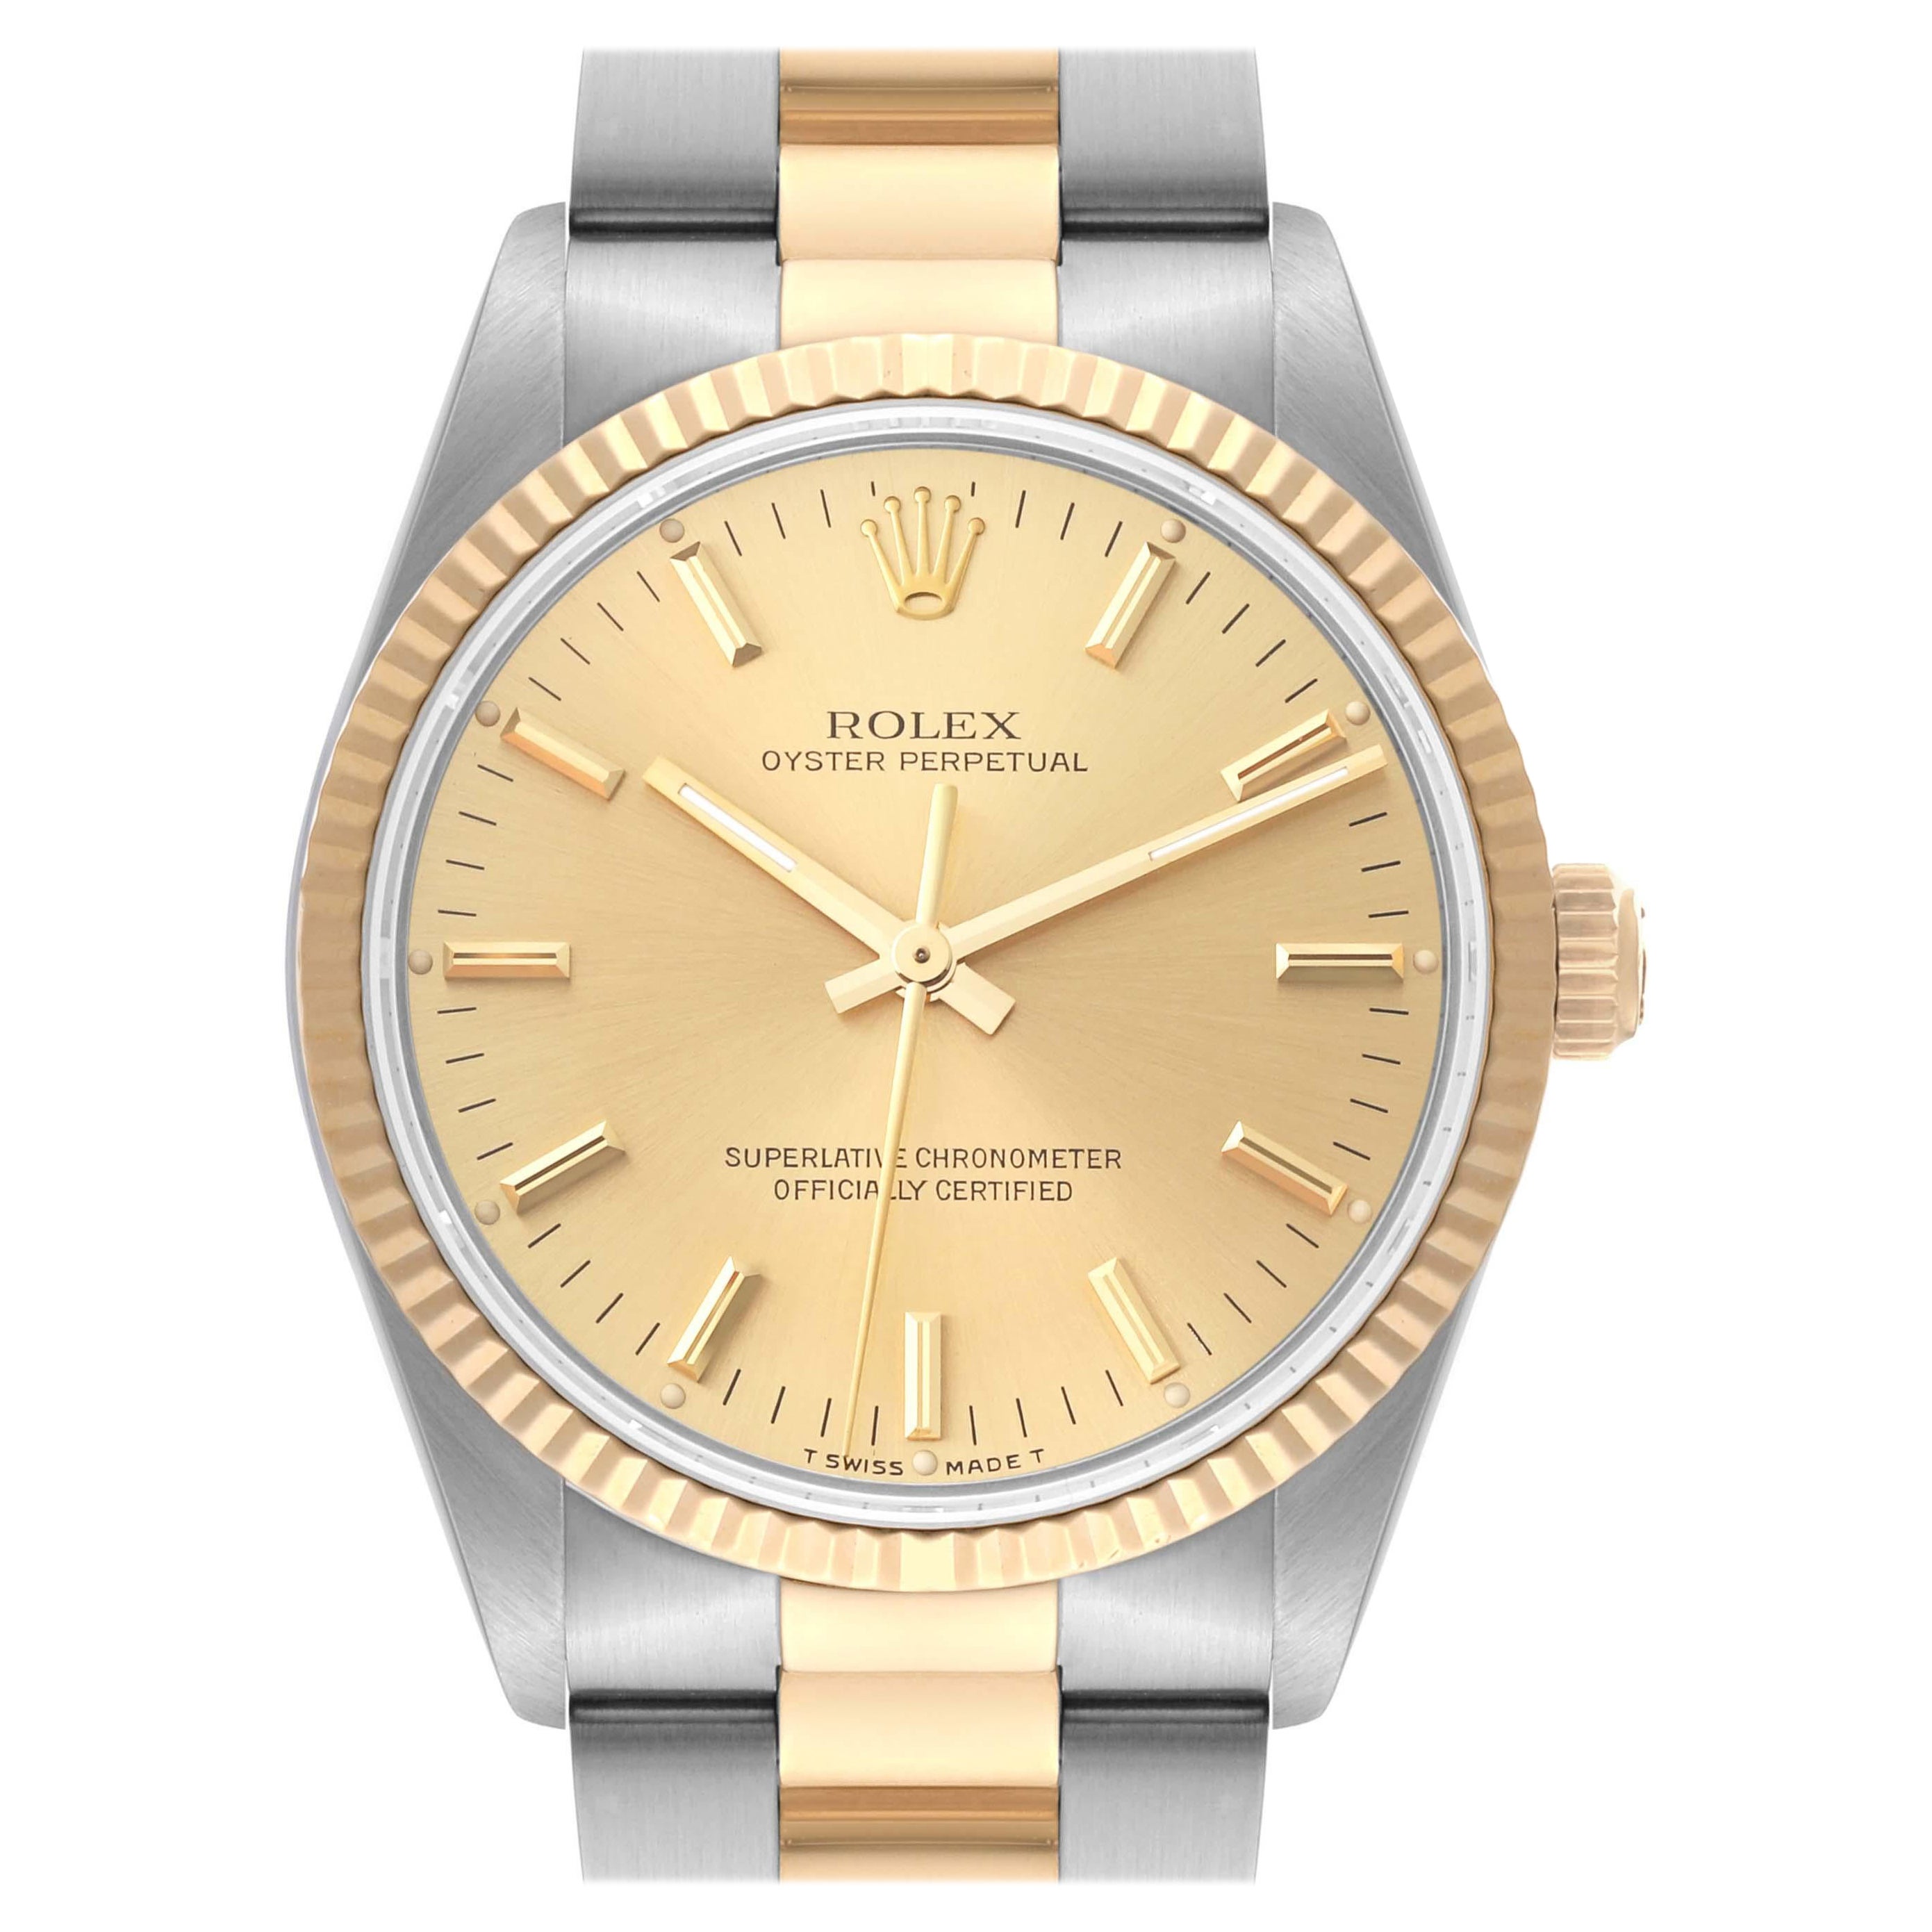 Rolex Oyster Perpetual Fluted Bezel Steel Yellow Gold Mens Watch 14233 For Sale